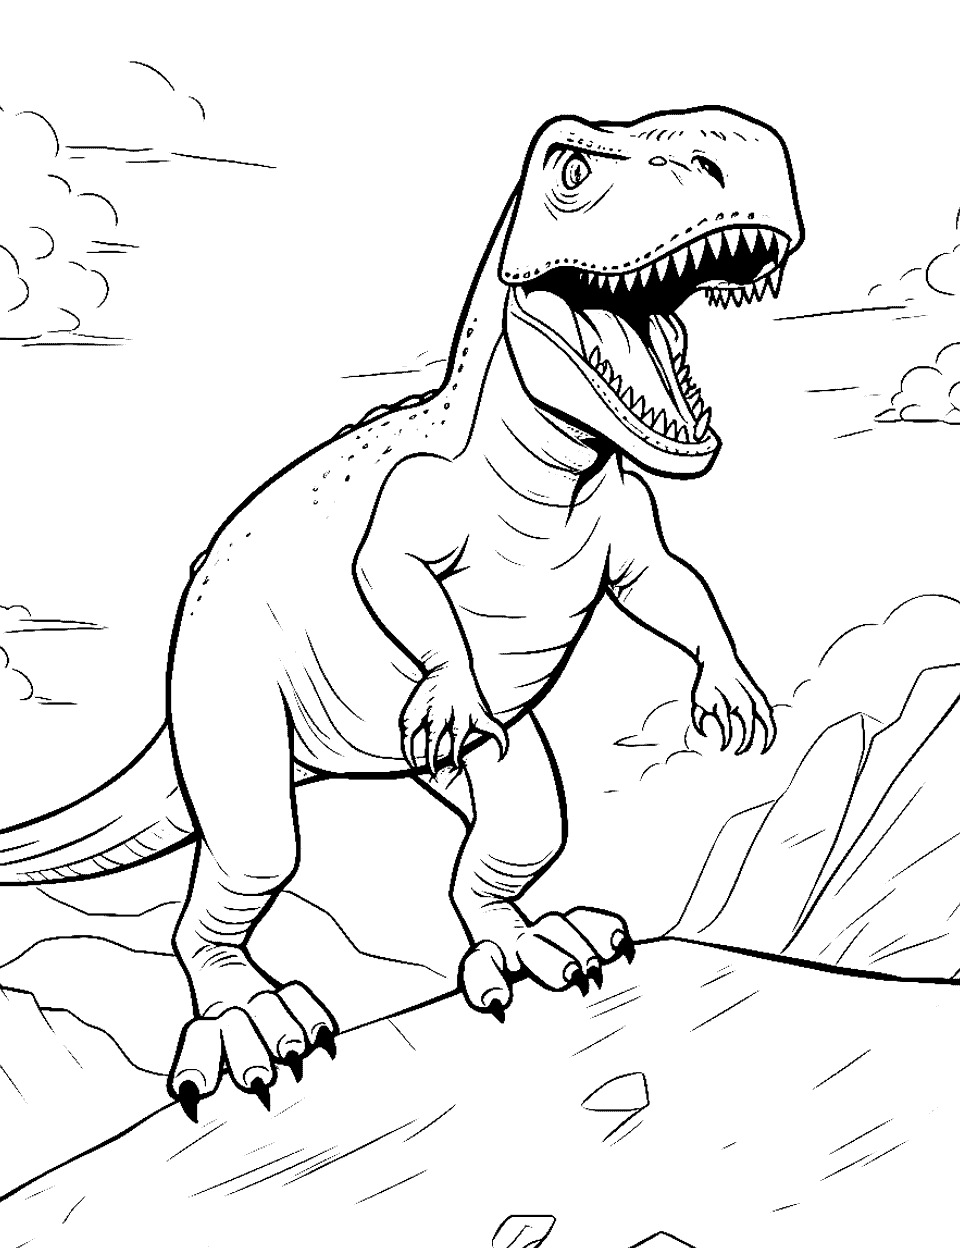 Fun Day Out for T Rex T-rex Coloring Page - A T-Rex sliding down a hill gleefully.